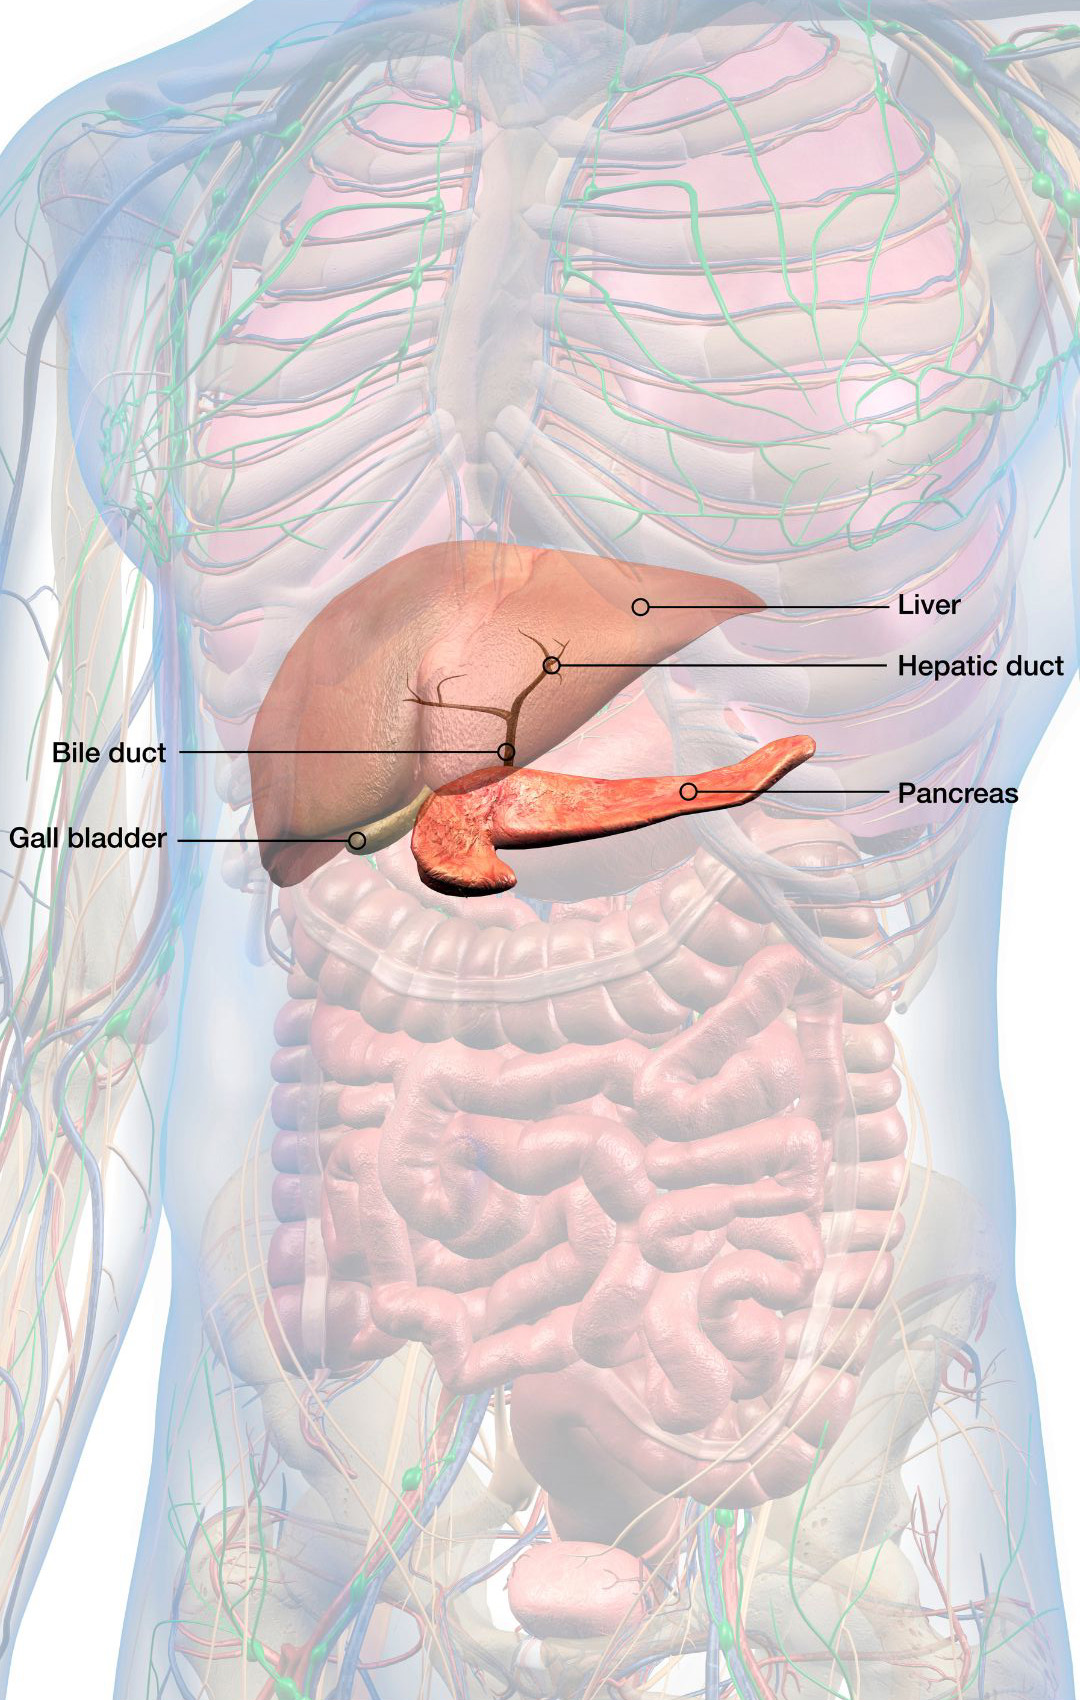 Bile duct cancer, also known as Cholangiocarcinoma, requires surgery that’s often complex